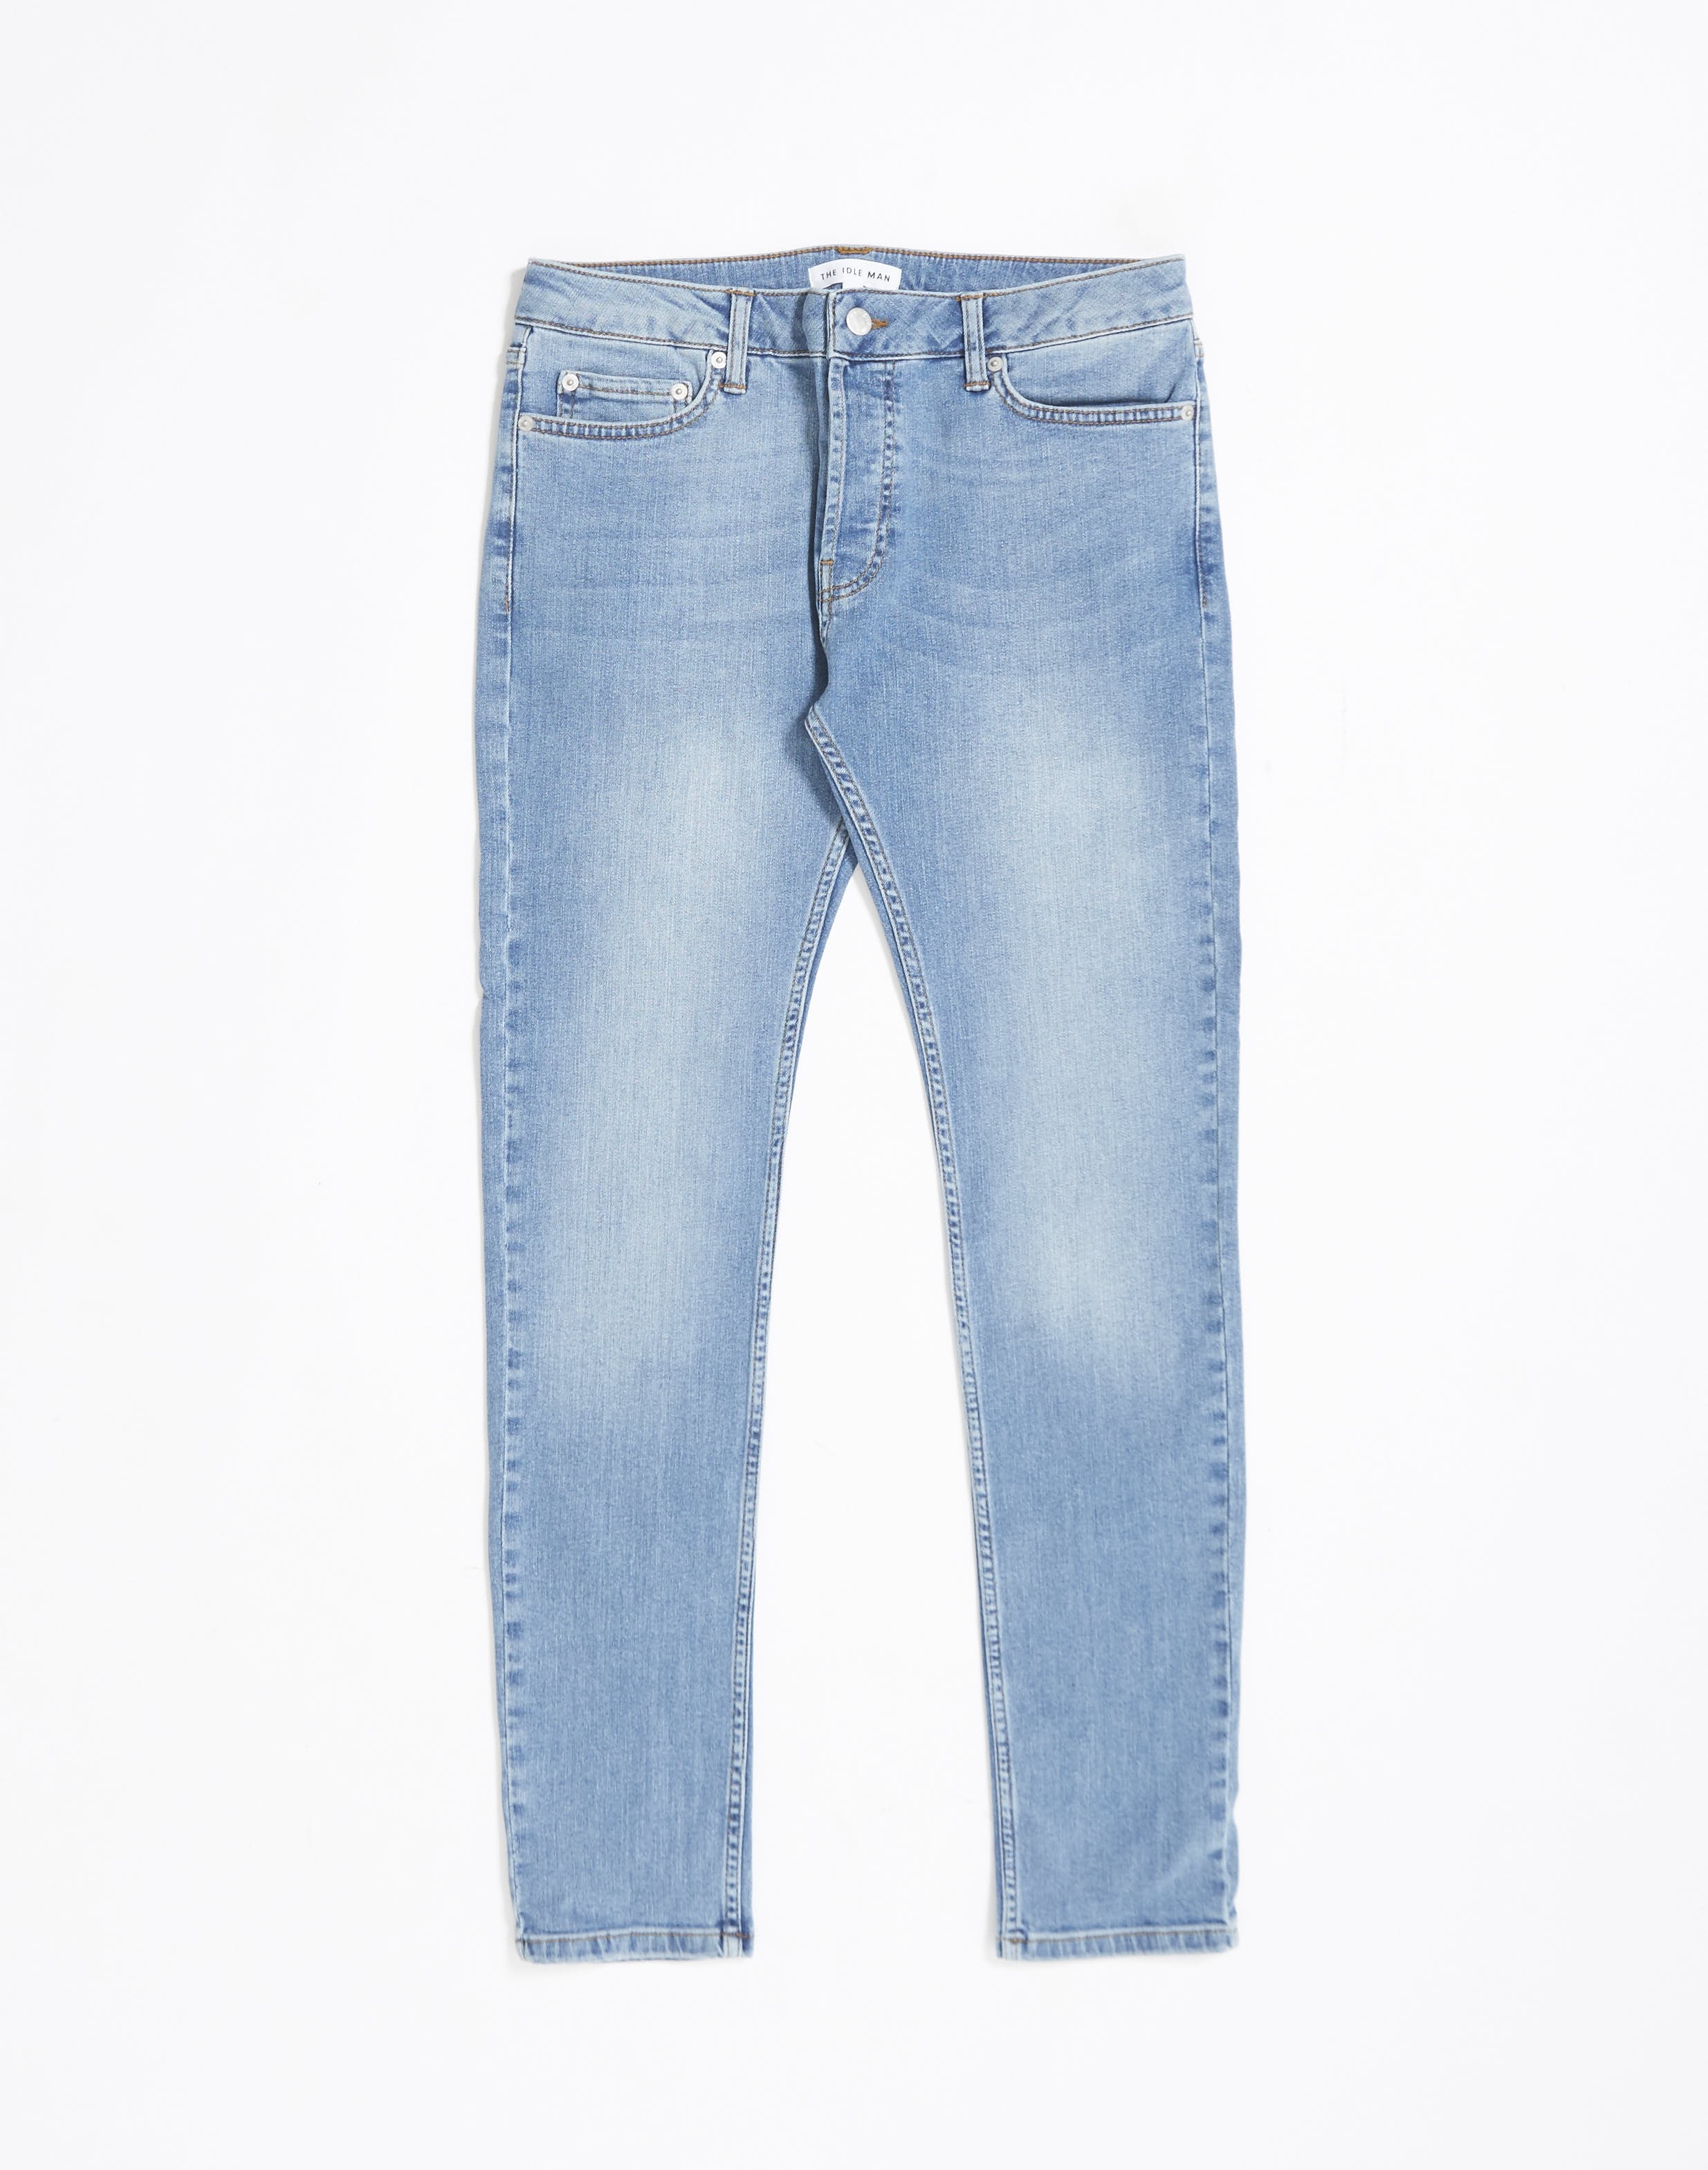 The Idle Man Stretch Skinny Fit Stonewash Jeans at The Idle Man